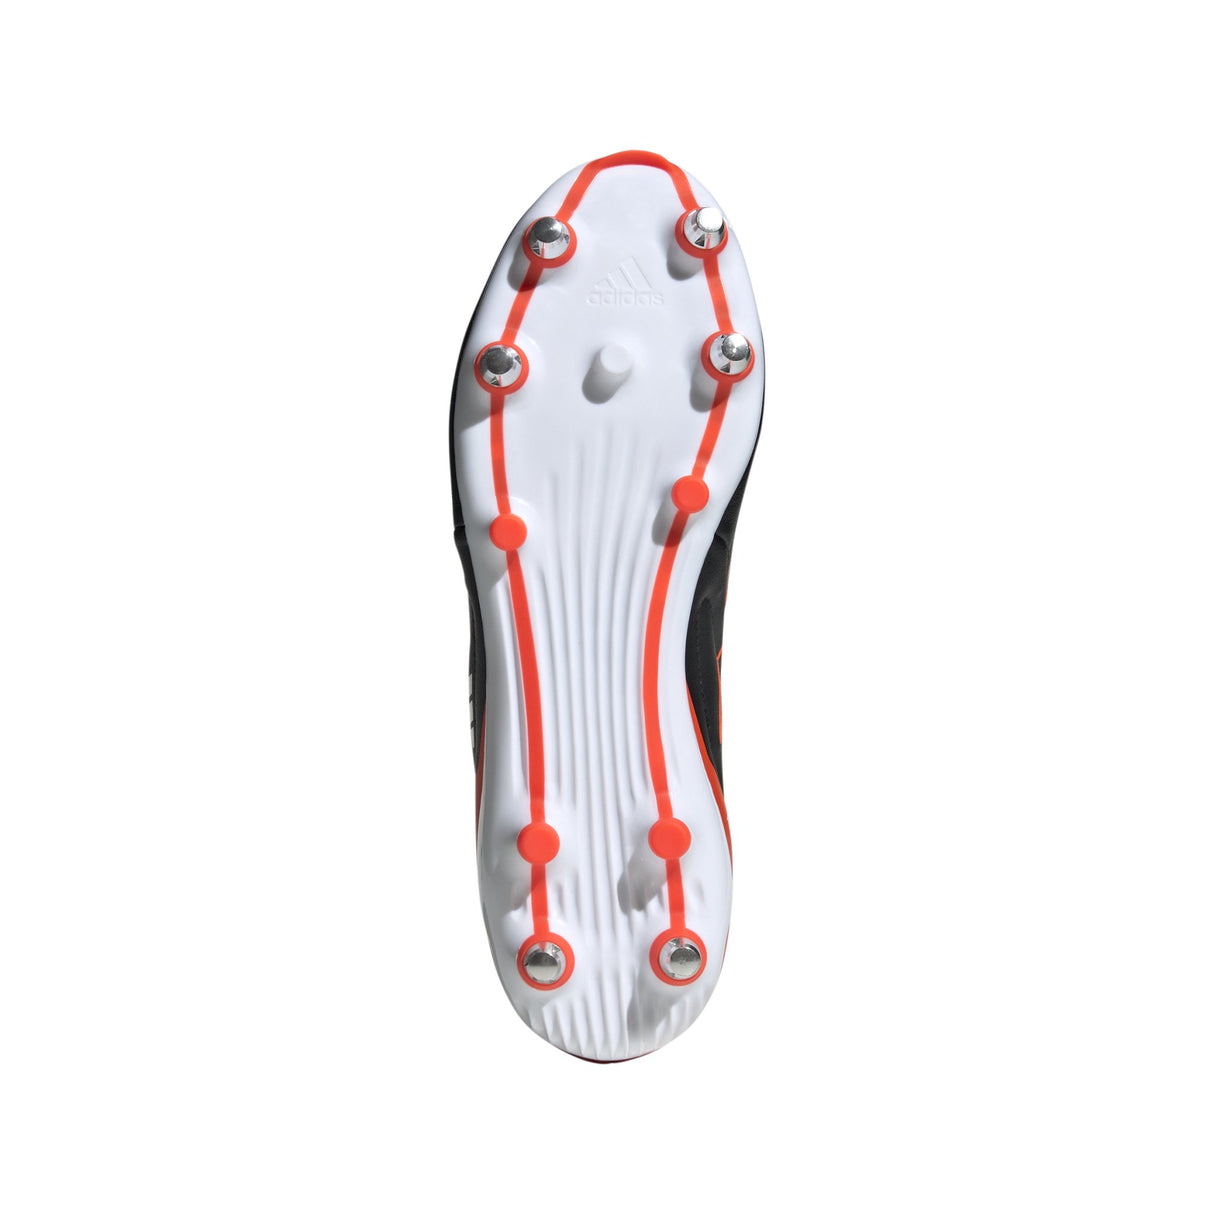 Adidas RS-15 Elite SG Rugby Boots - RED | | Adidas | Absolute Rugby